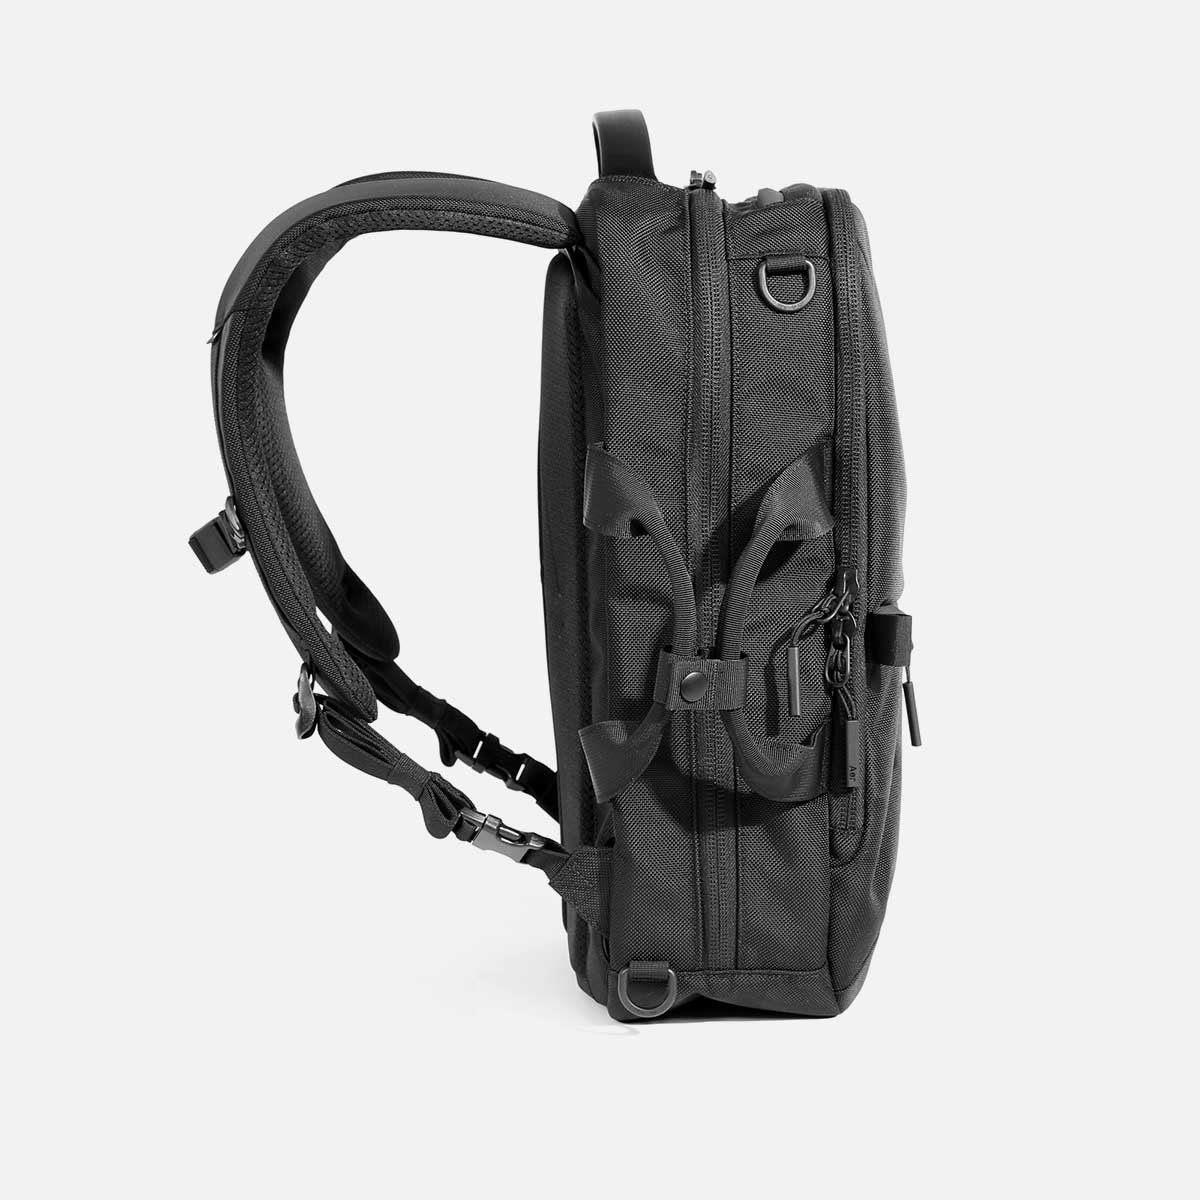 Convertible waterproof laptop backpack for work and travel with water bottle pocket